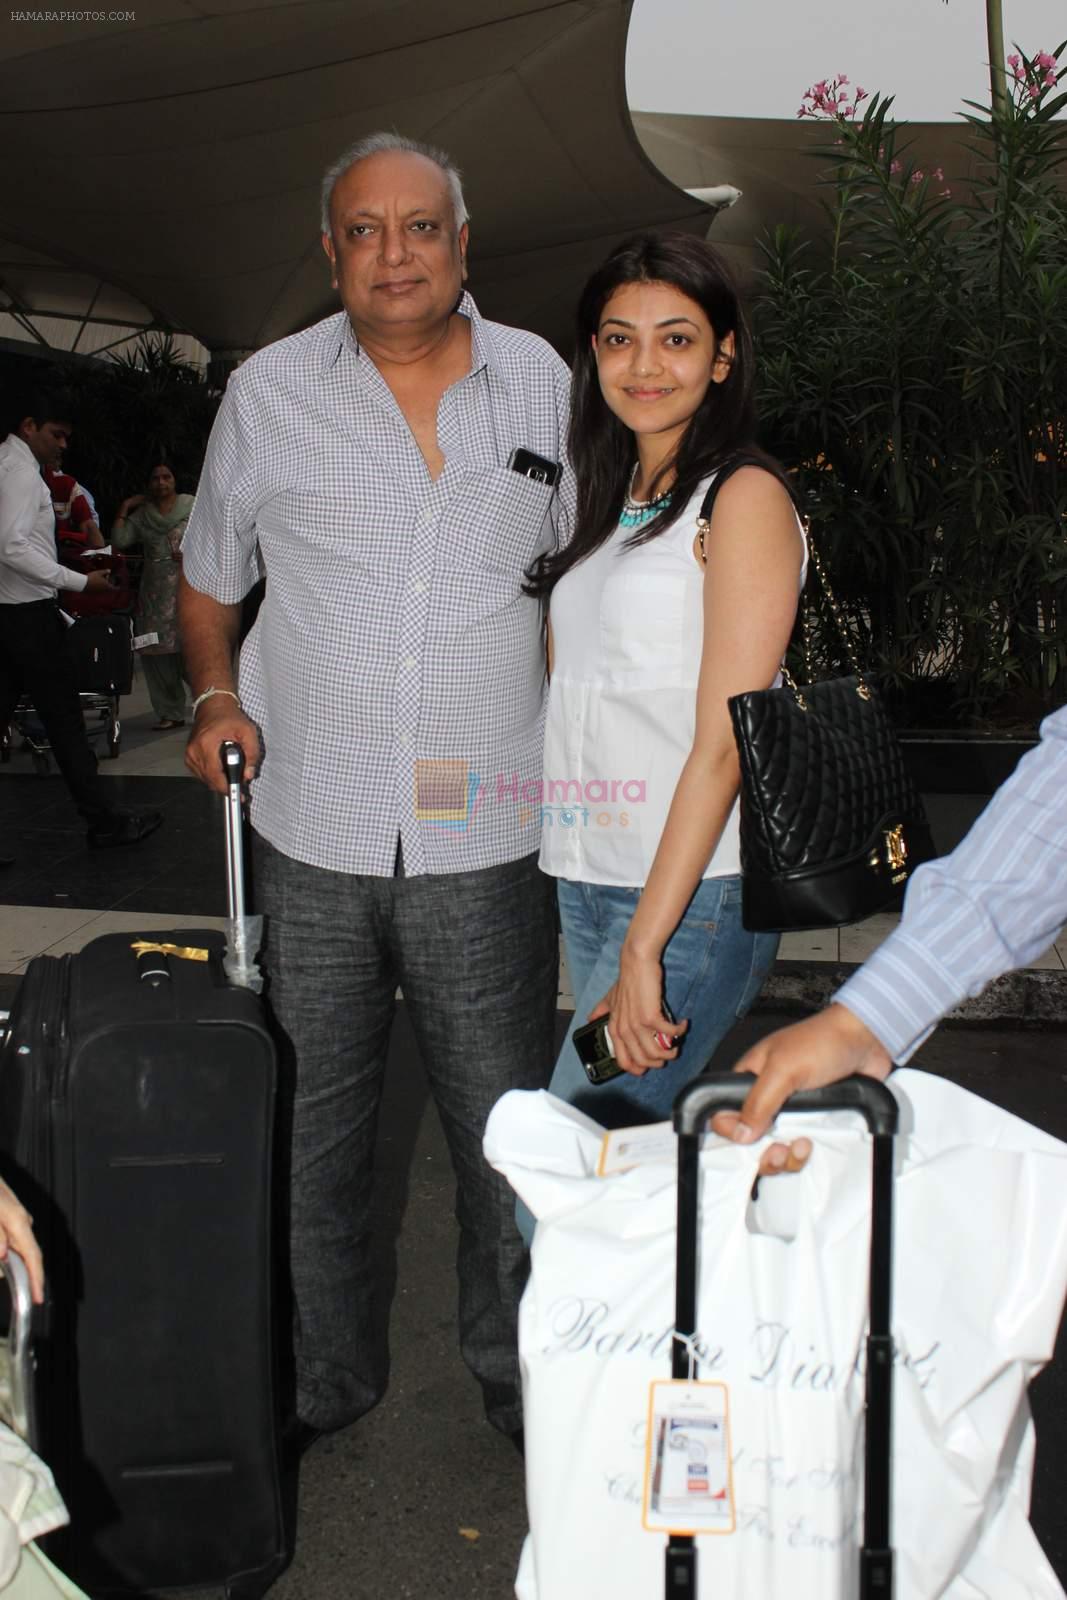 Kajal Aggarwal snapped at airport on 28th Oct 2015